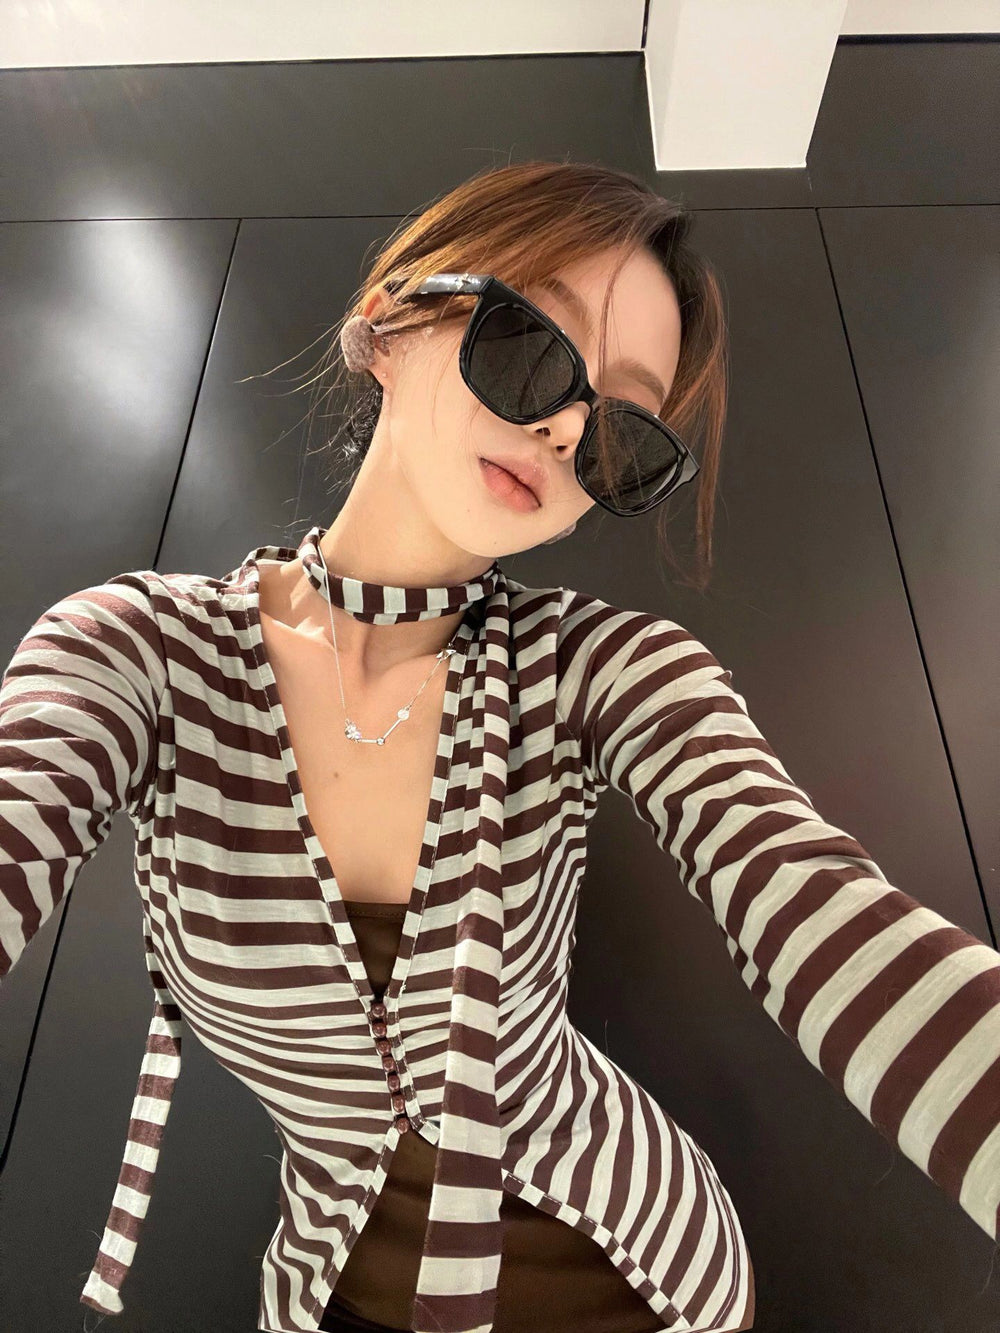 Effortlessly chic, a woman in a striped shirt and stylish sunglasses exudes an aura of luxury and elegance, captivating all who behold her.